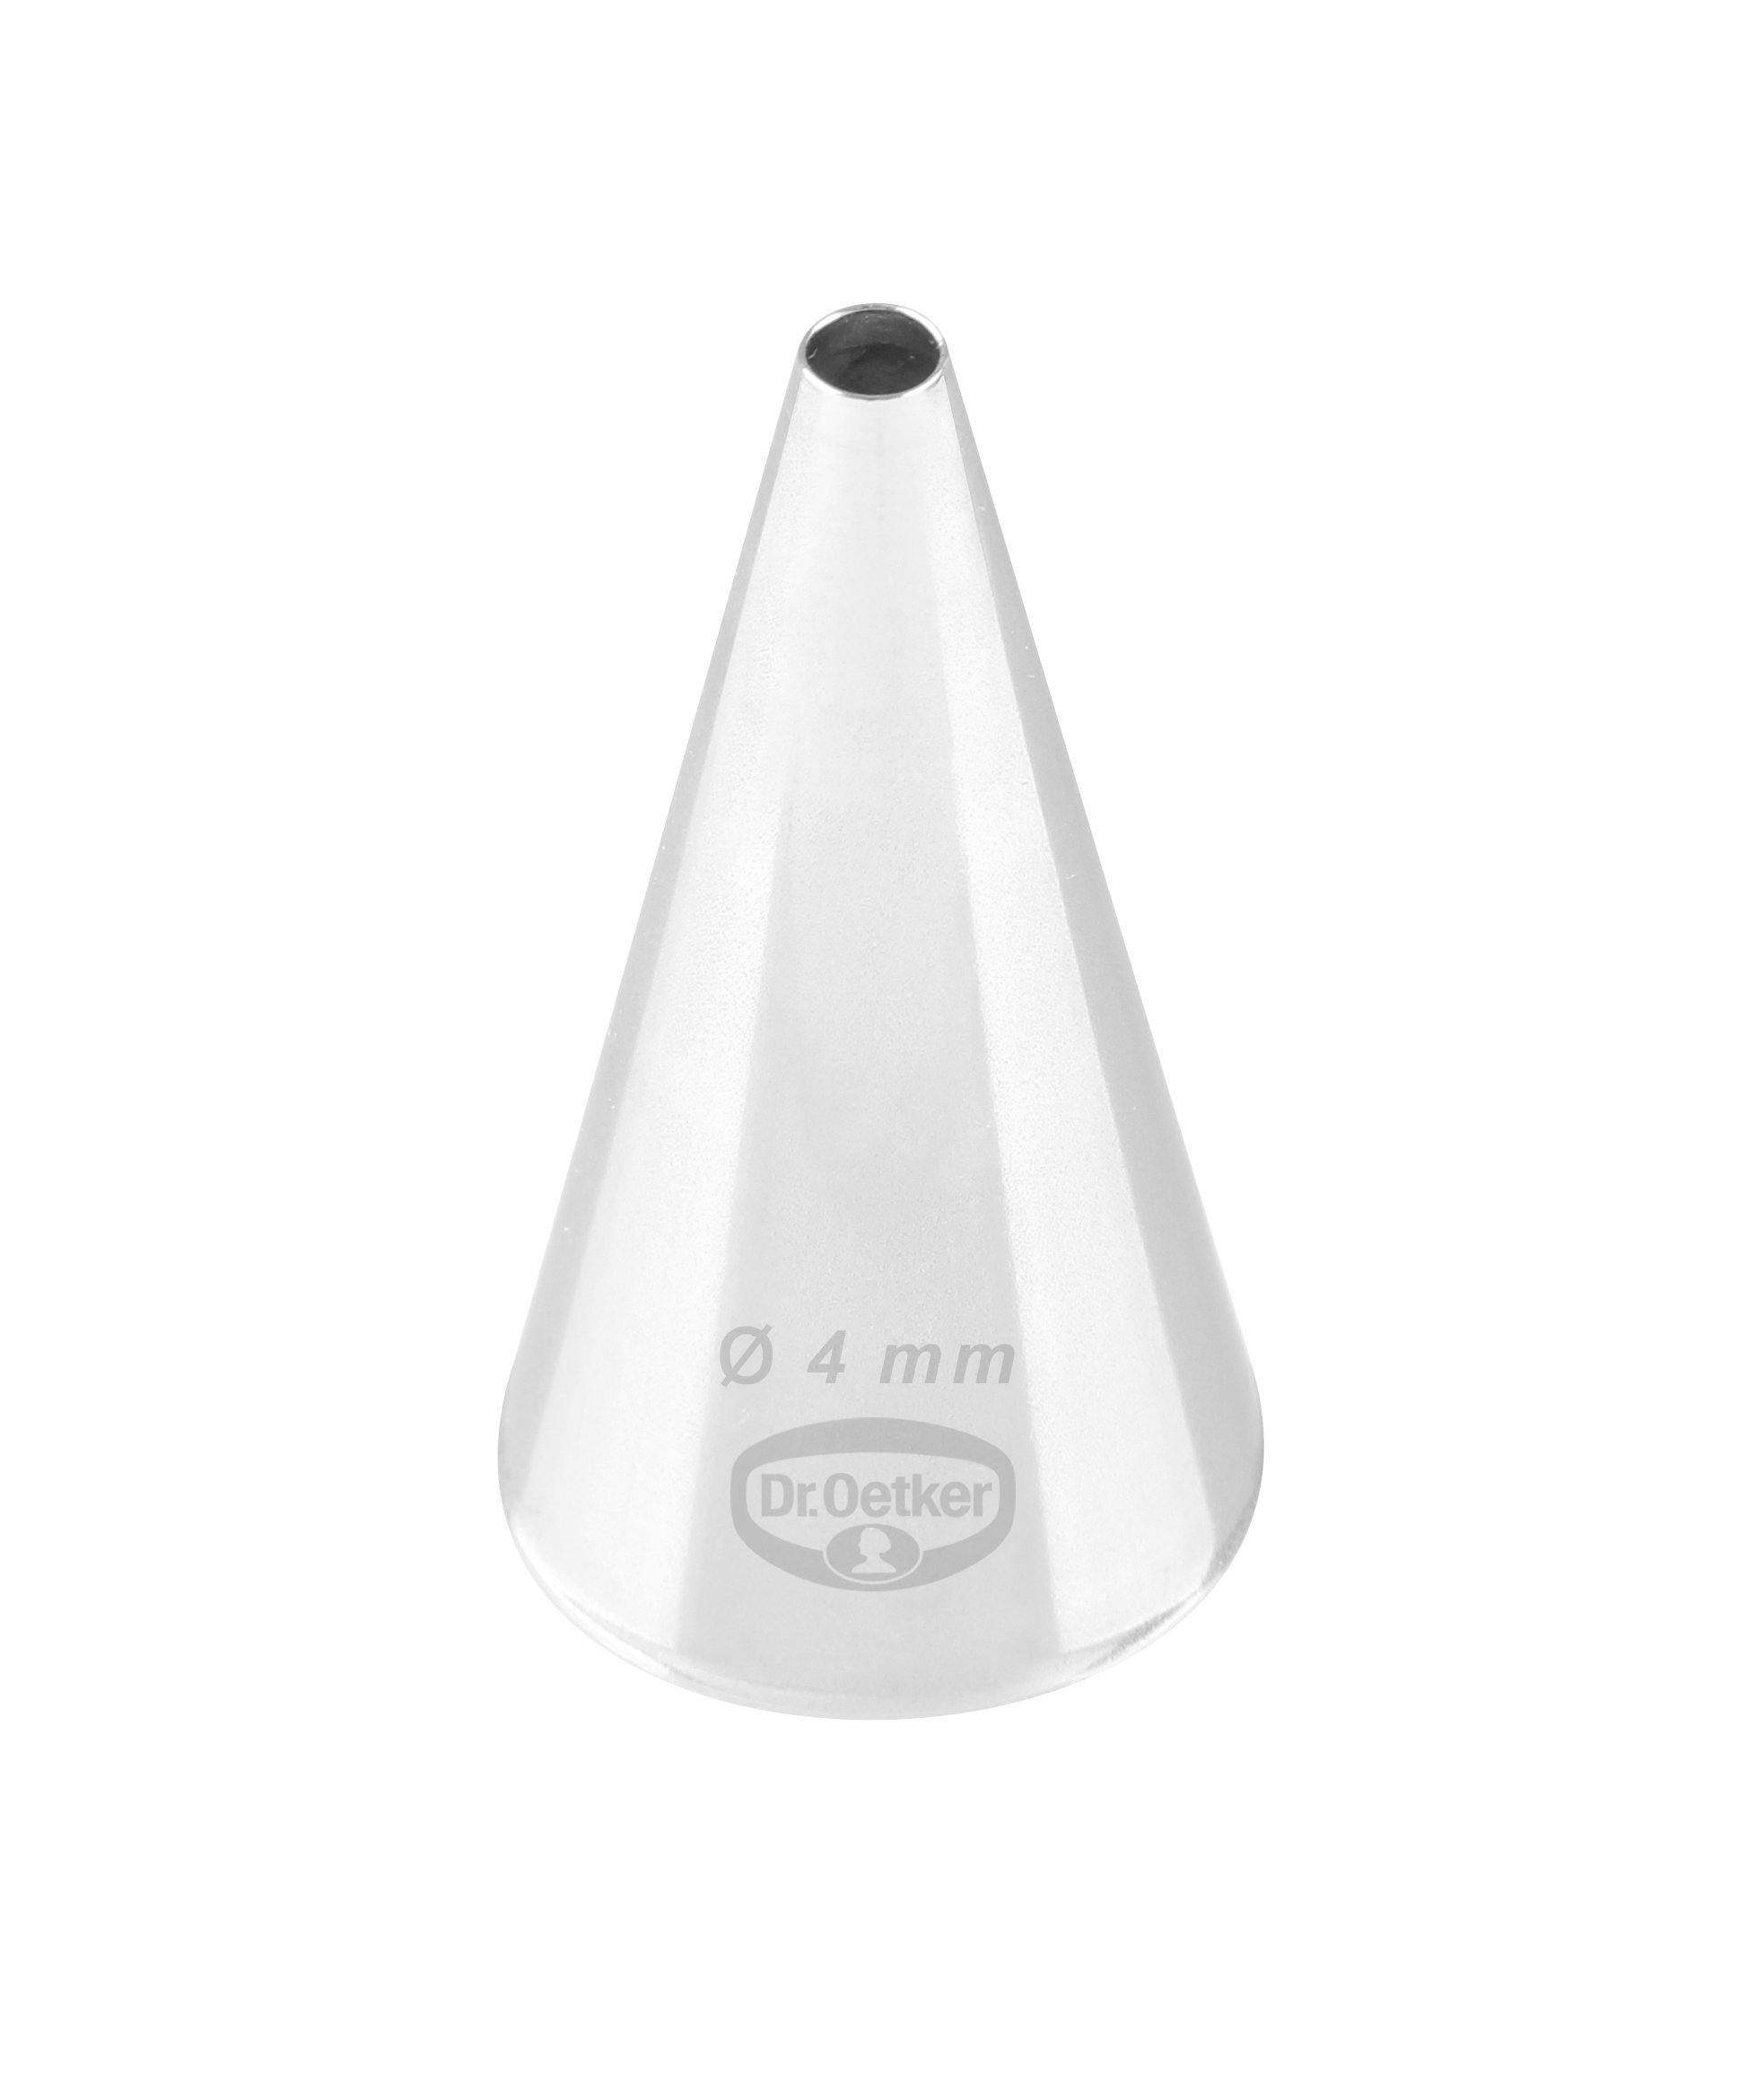 Dr. Oetker Stainless Steel Nozzle, Variant Shapes
                Dr. Oetker Stainless Steel Nozzle, Variant Shapes